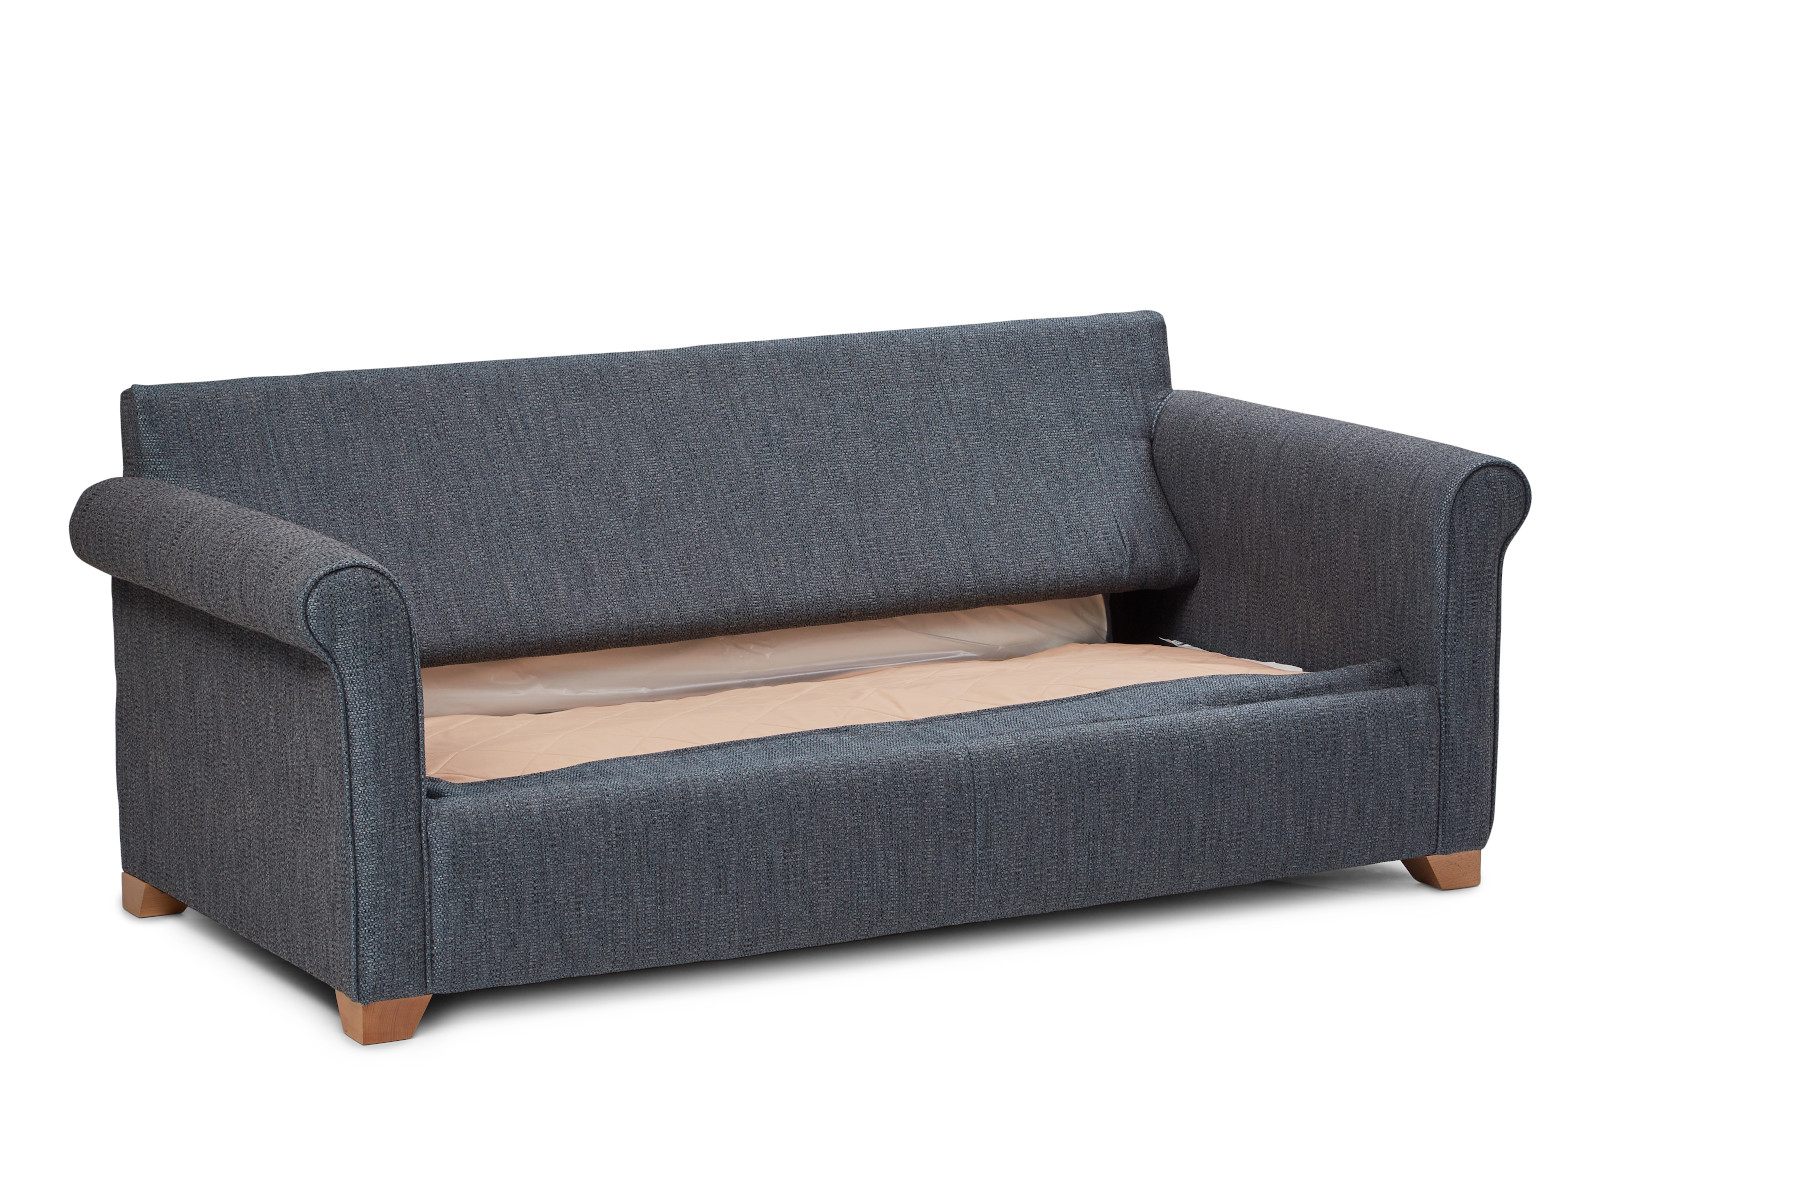 Poppy 3 Seater Sofabed